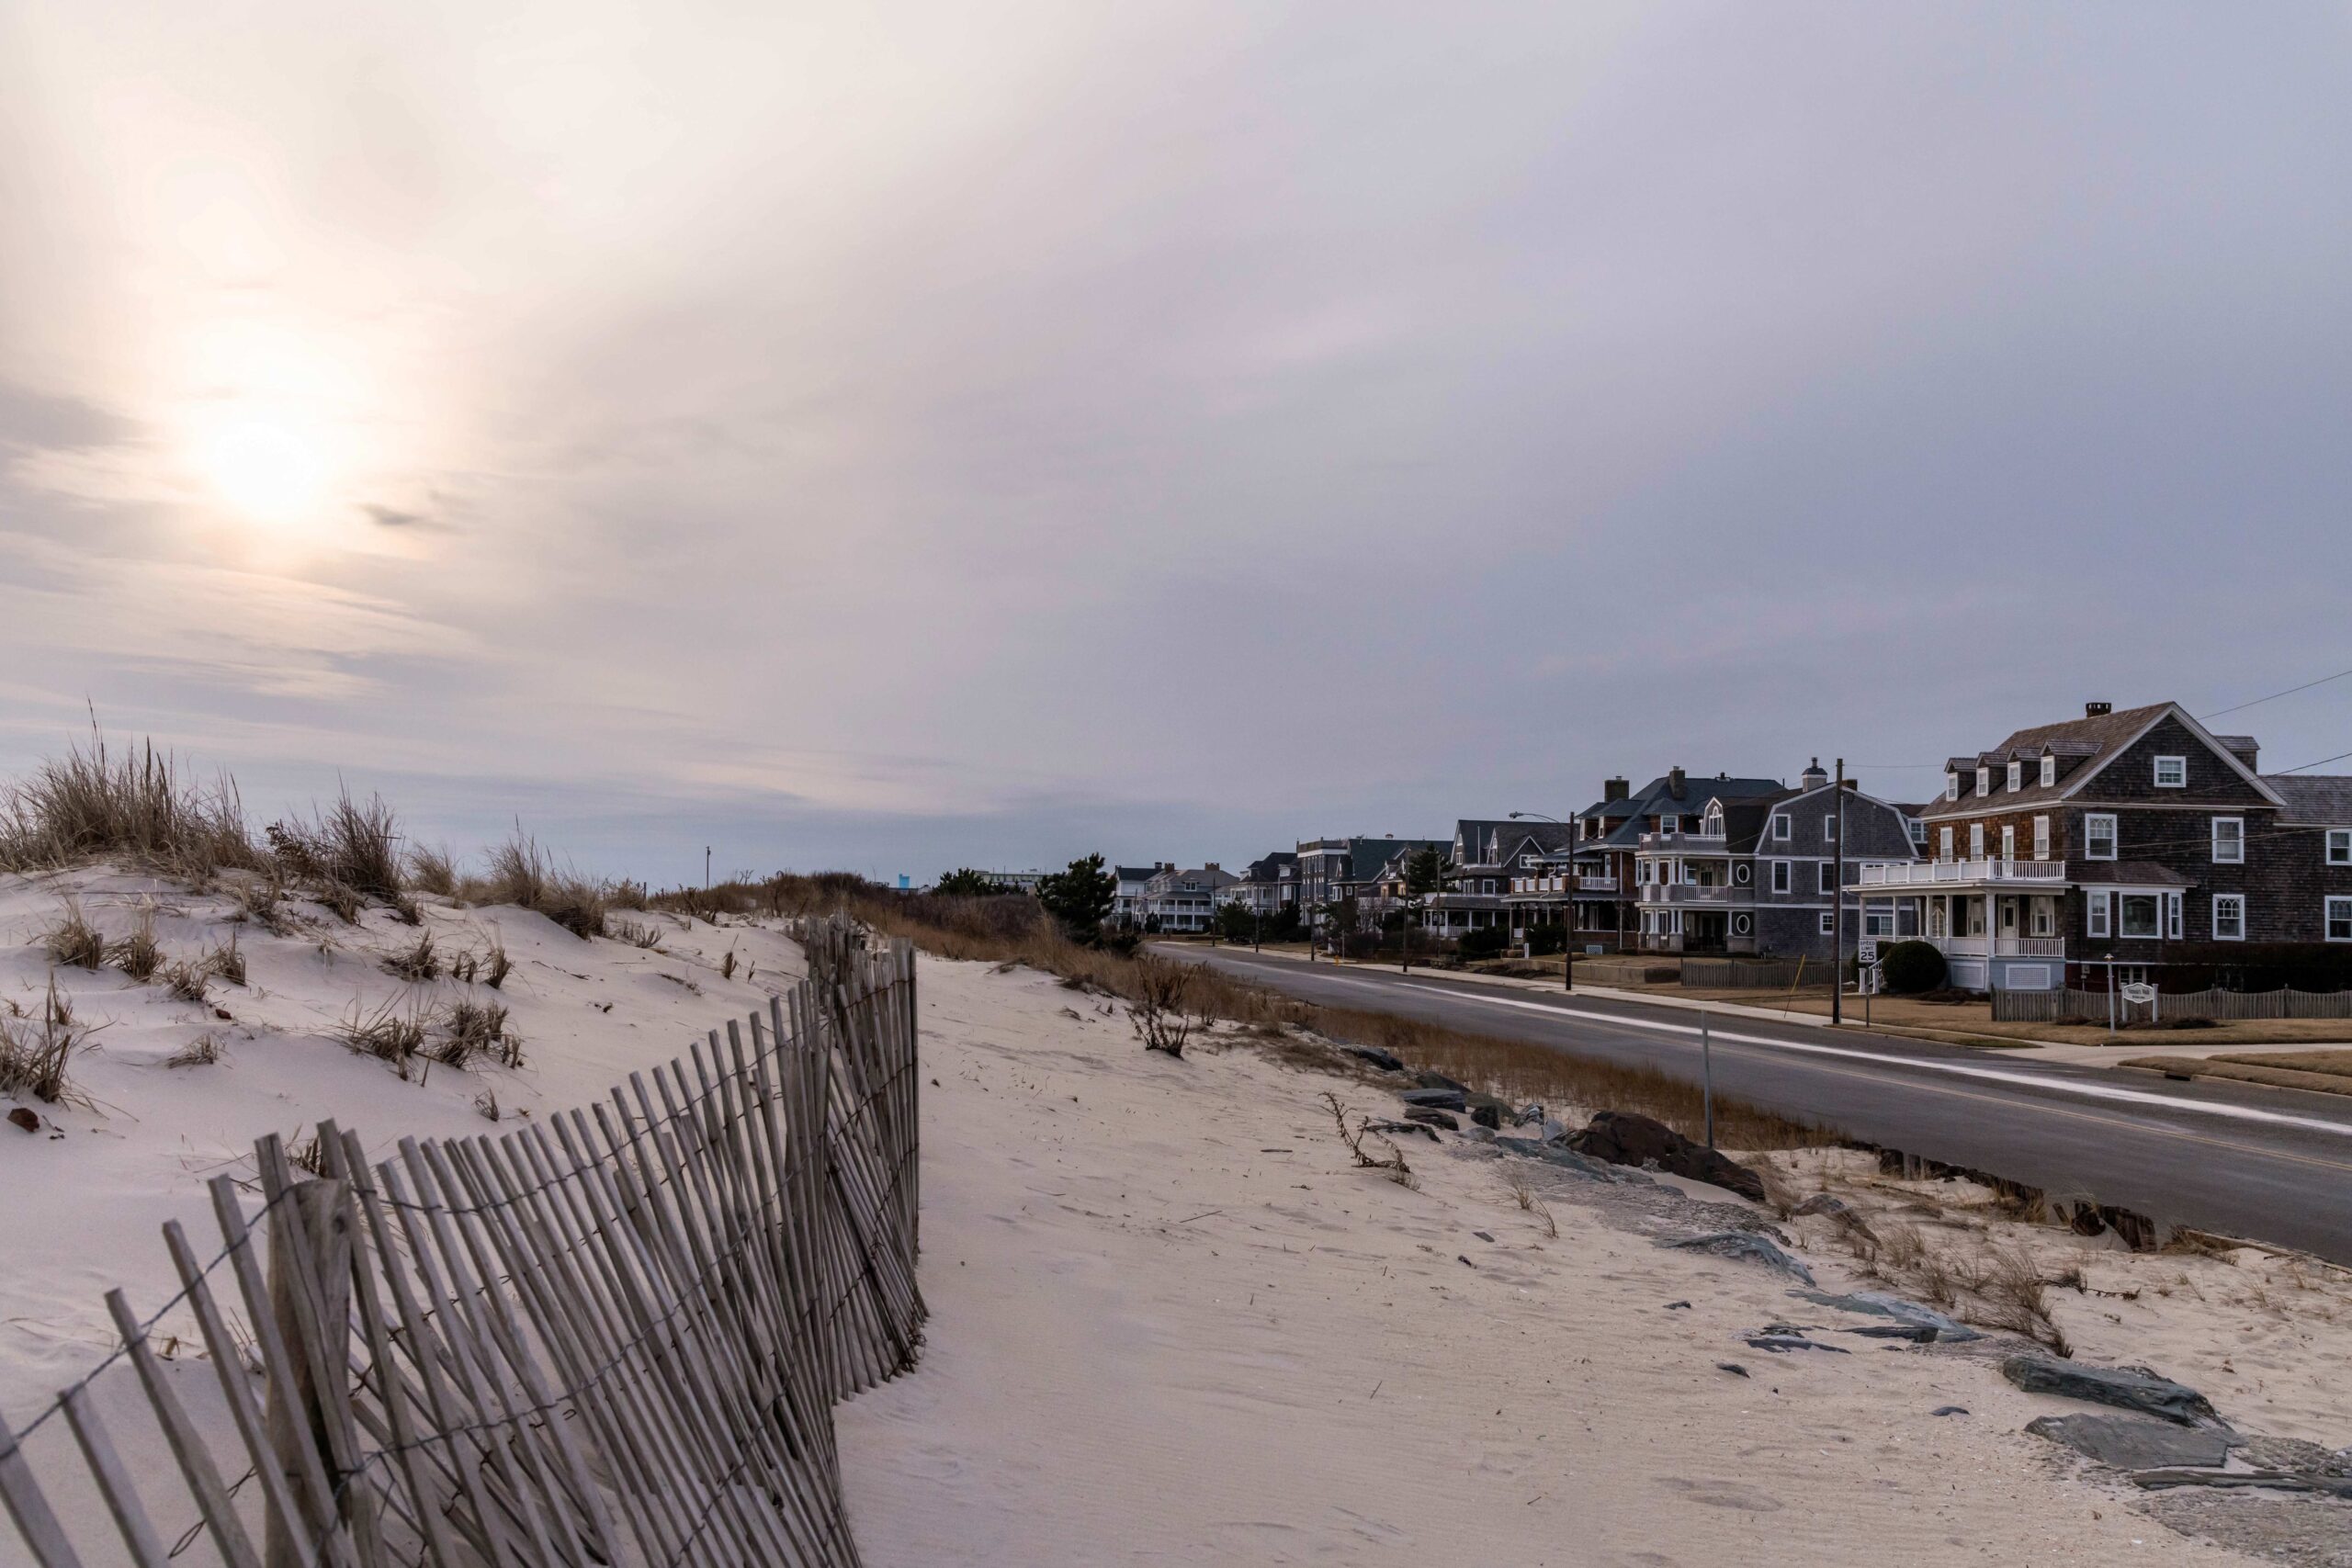 A view down Beach Ave. with cedar shake beach homes on the right and beach dunes with a fence on the left and sun hazily shining behind an overcast blue grey cloudy sky